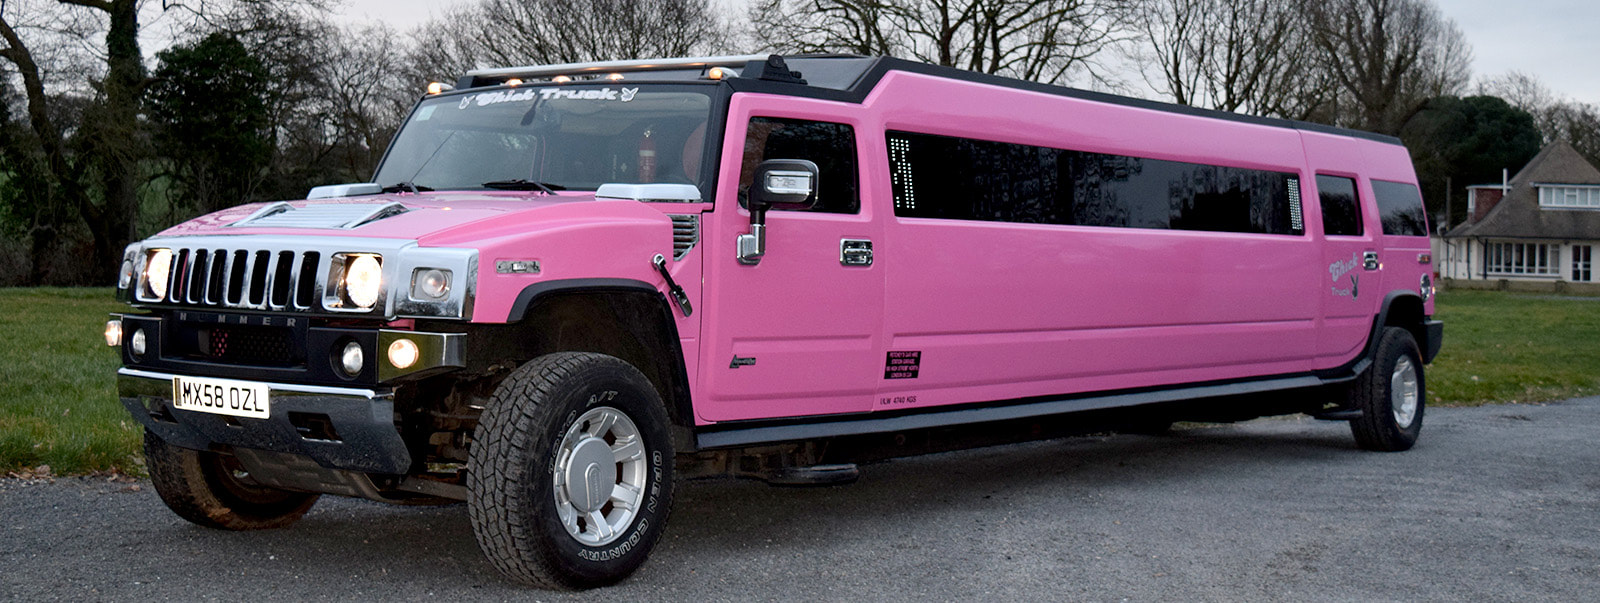 Pink Hummer Limo Hire Altrincham